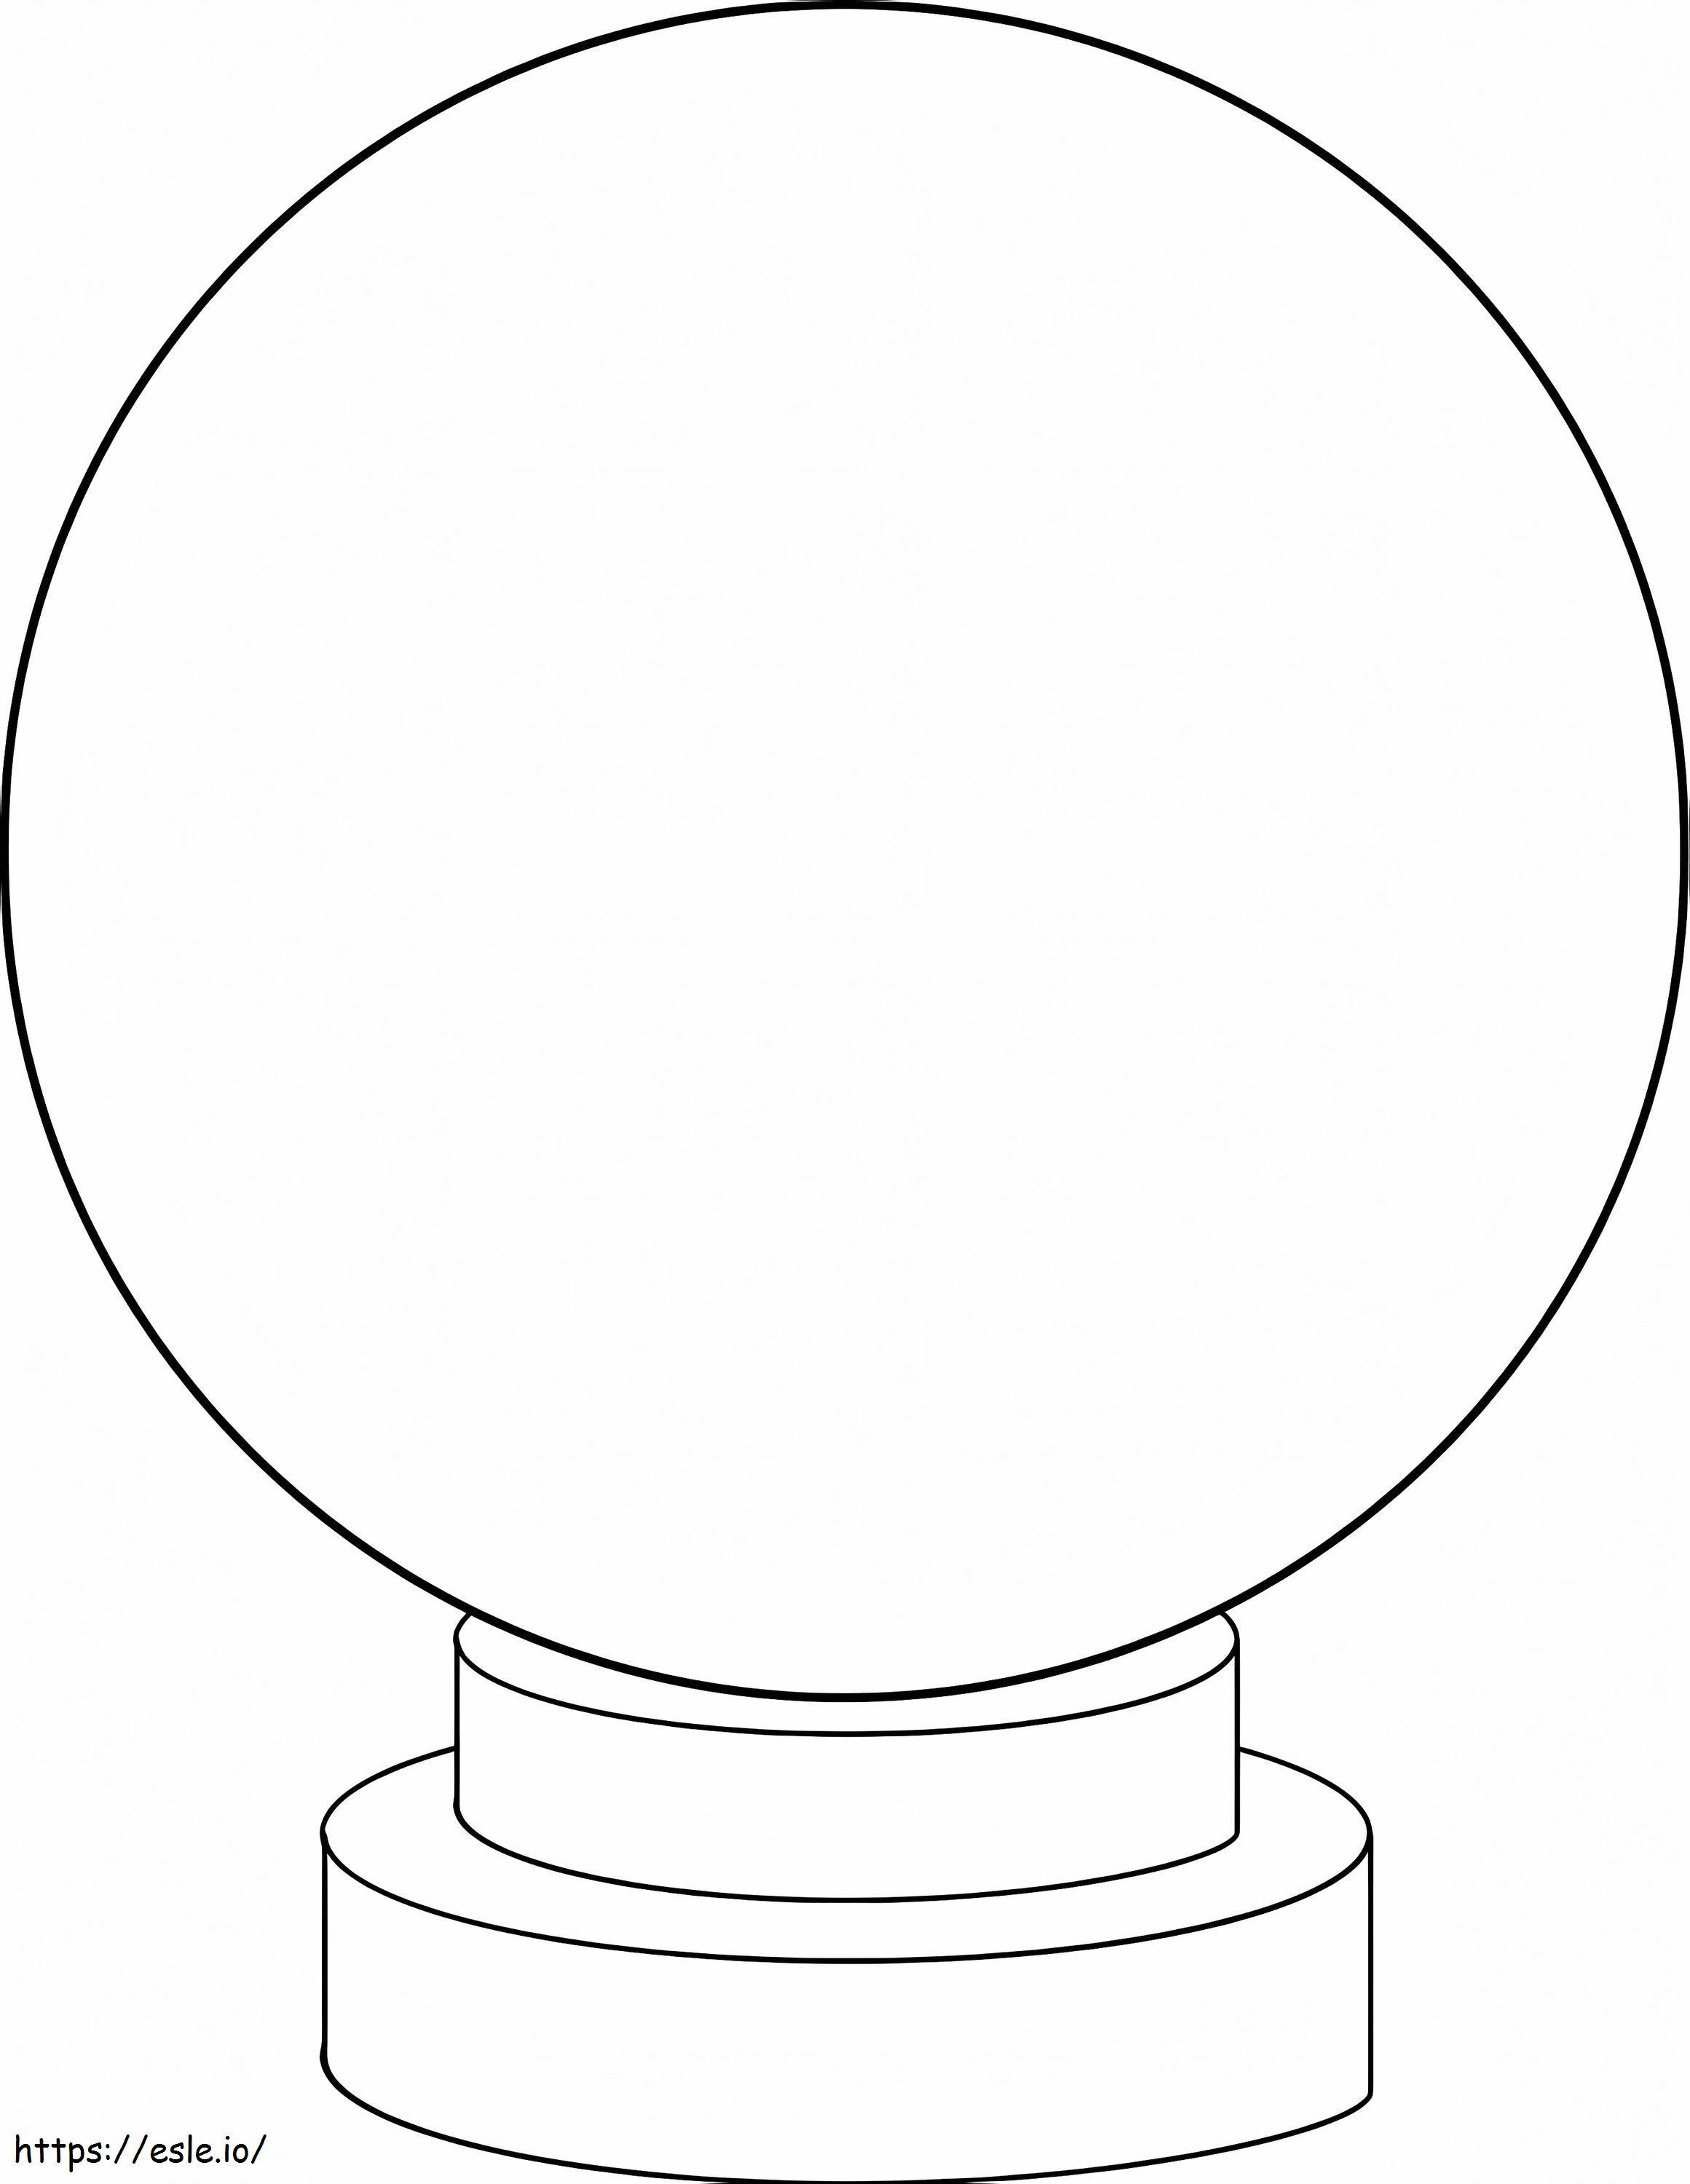 Easy Snow Globe coloring page